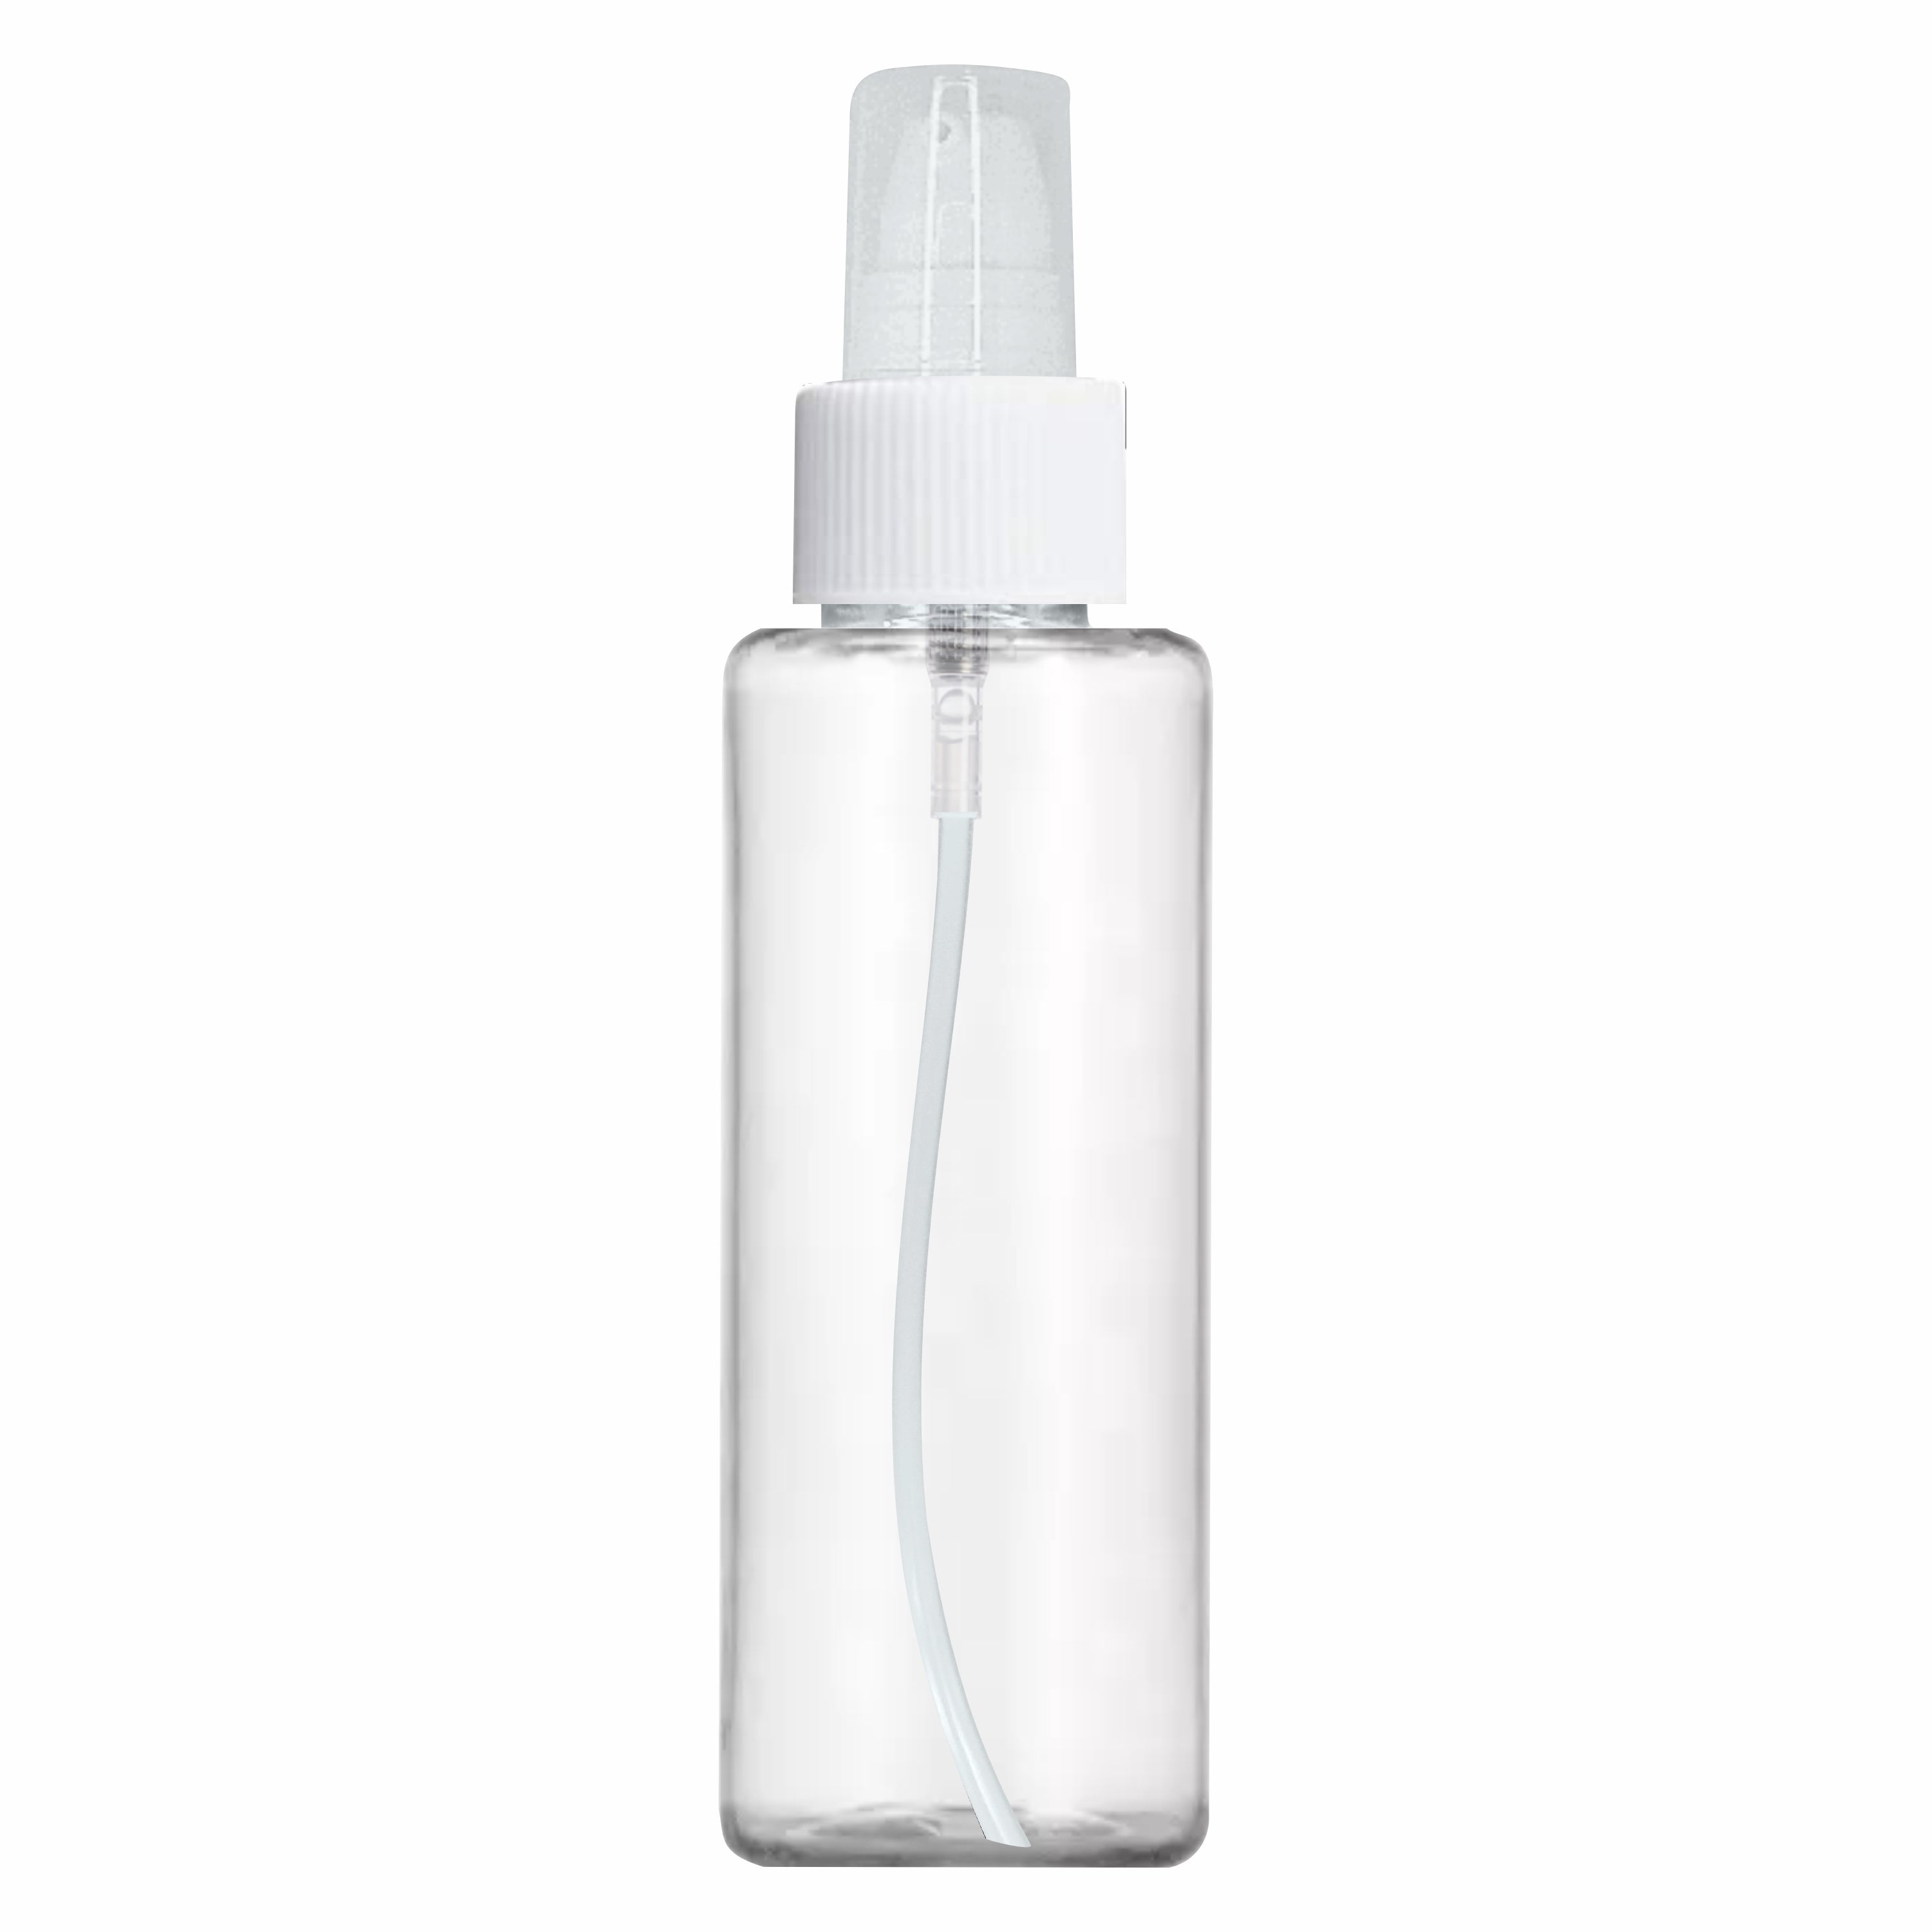 |ZMT81| TRANSPARENT CLEAR ROUND PET BOTTLE WITH WHITE LOTION PUMP 30ml, 50ml, 100ml & 200ml